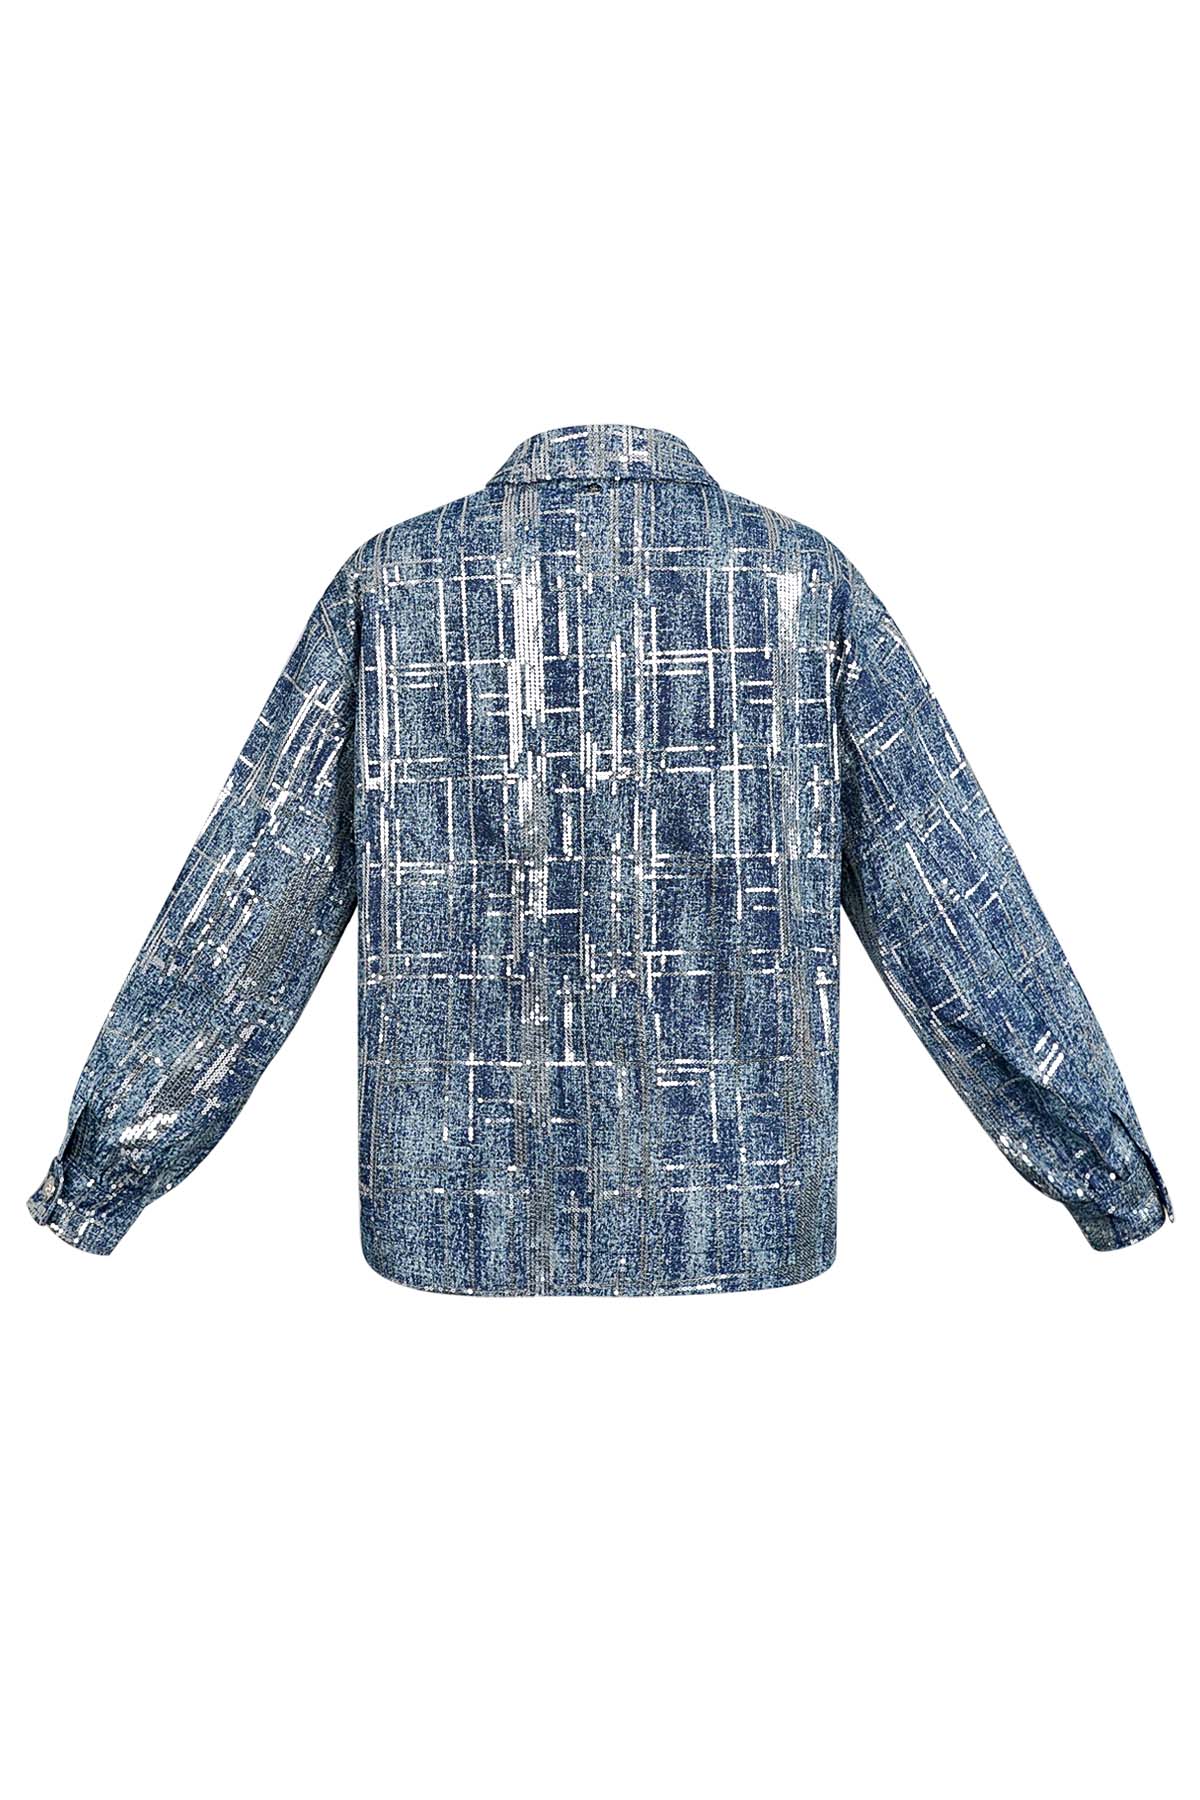 Jacket denim look with sequins - blue - S Picture7